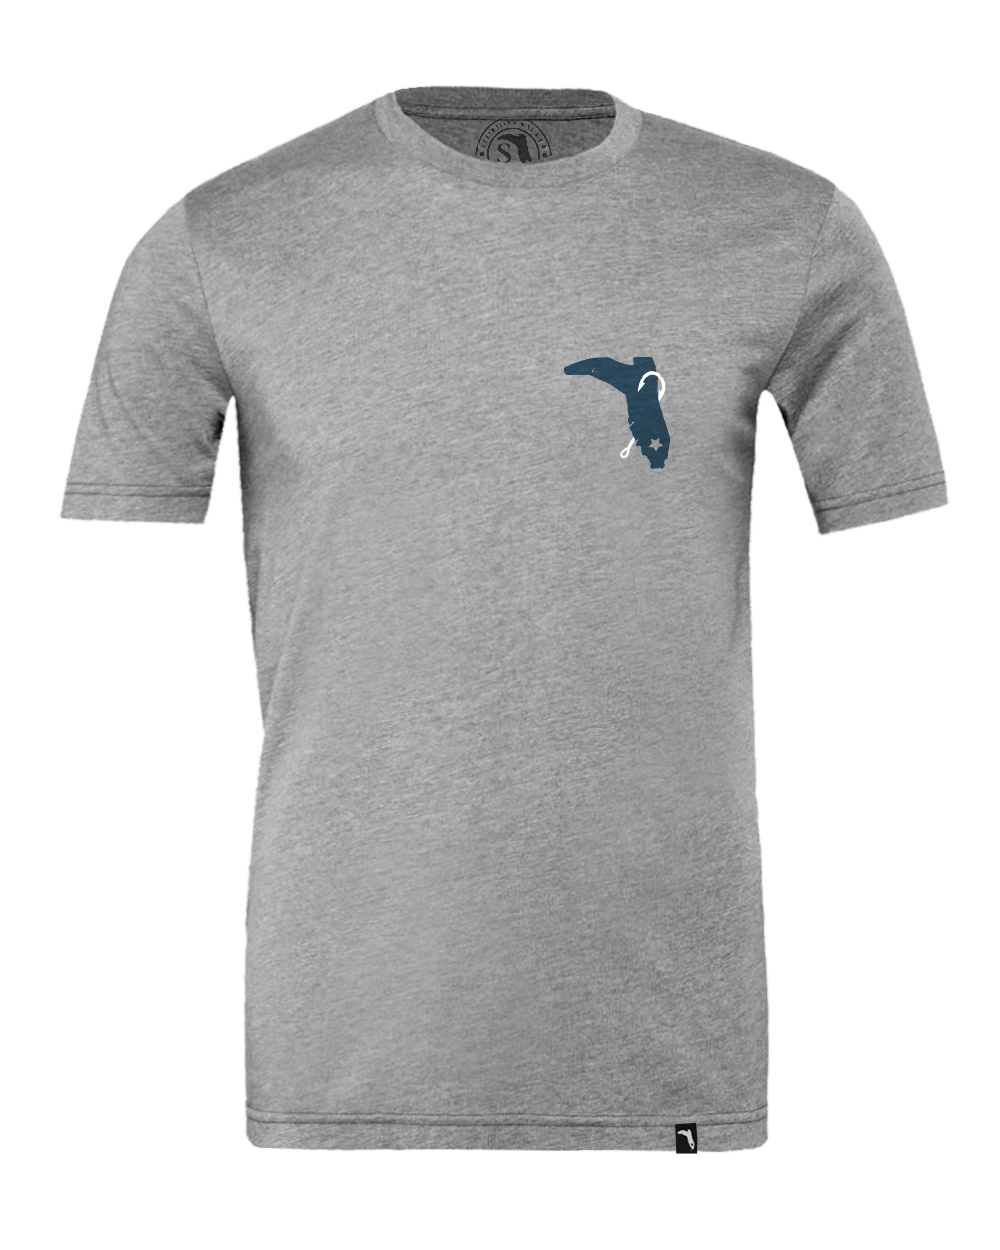 LIMITED FISH SNOOK SHIRT S/S - DEEP HEATHER